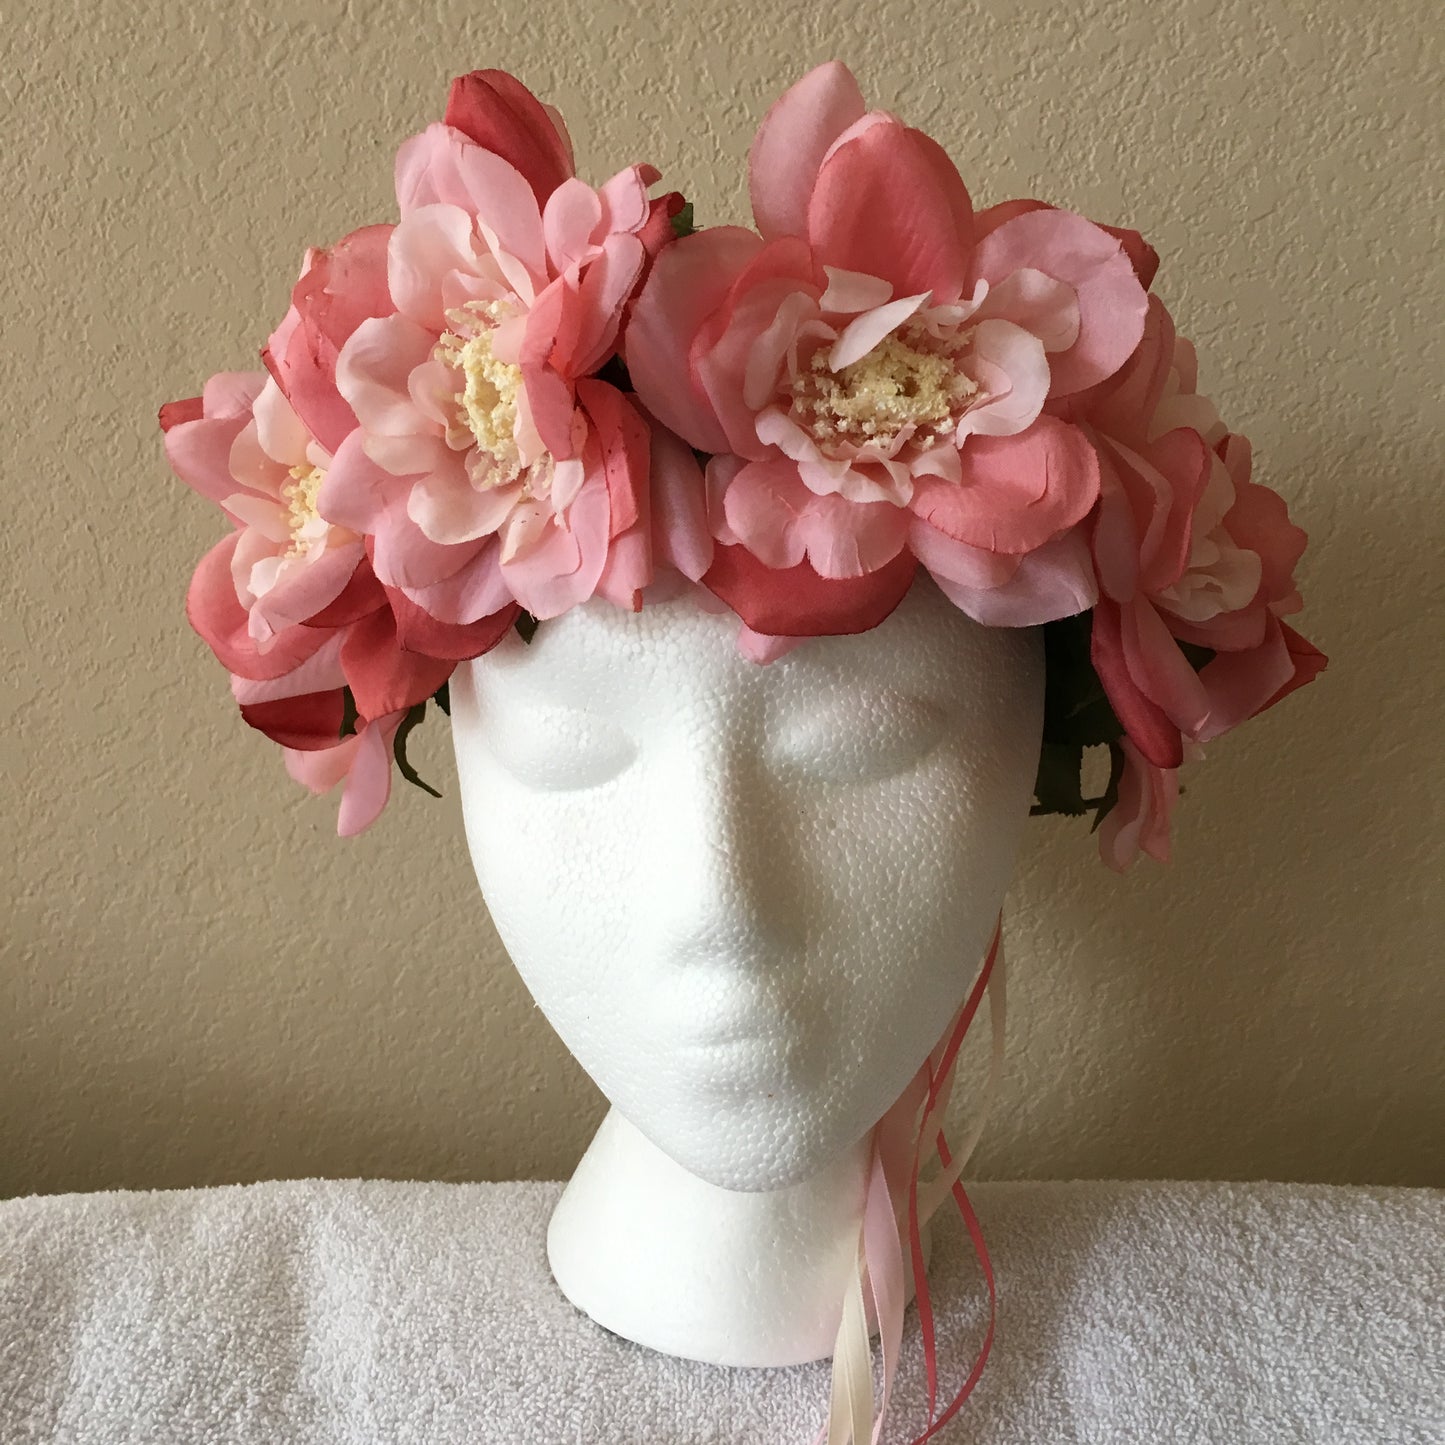 Large Wreath - Shades of pink flowers